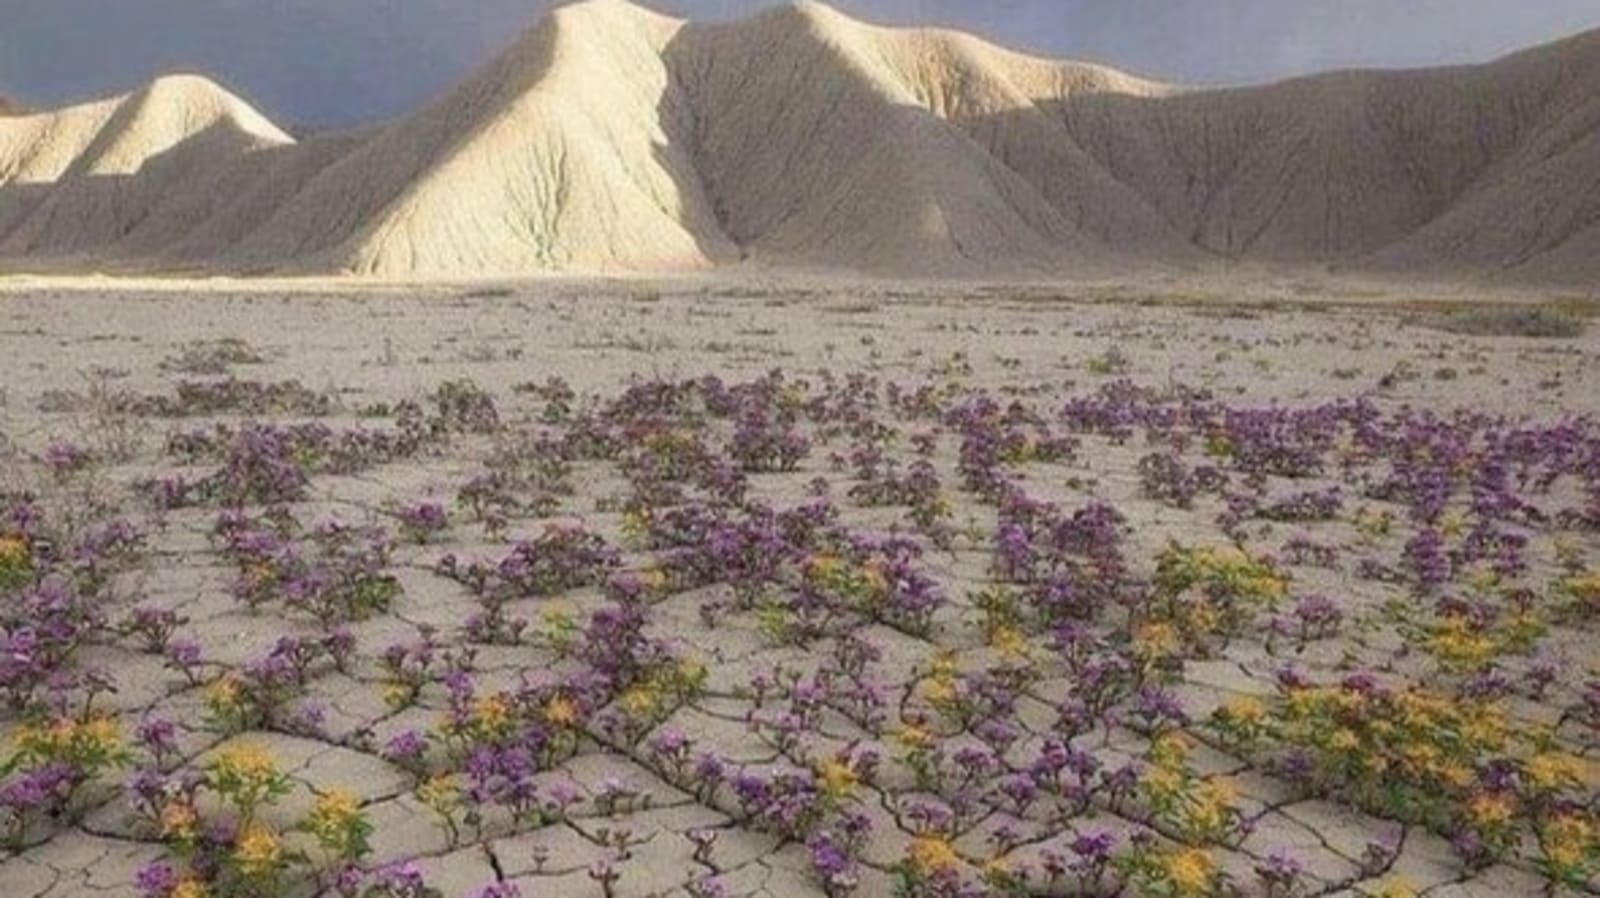 chile-s-flowering-desert-atacama-to-attract-tourists-after-heavy-rains